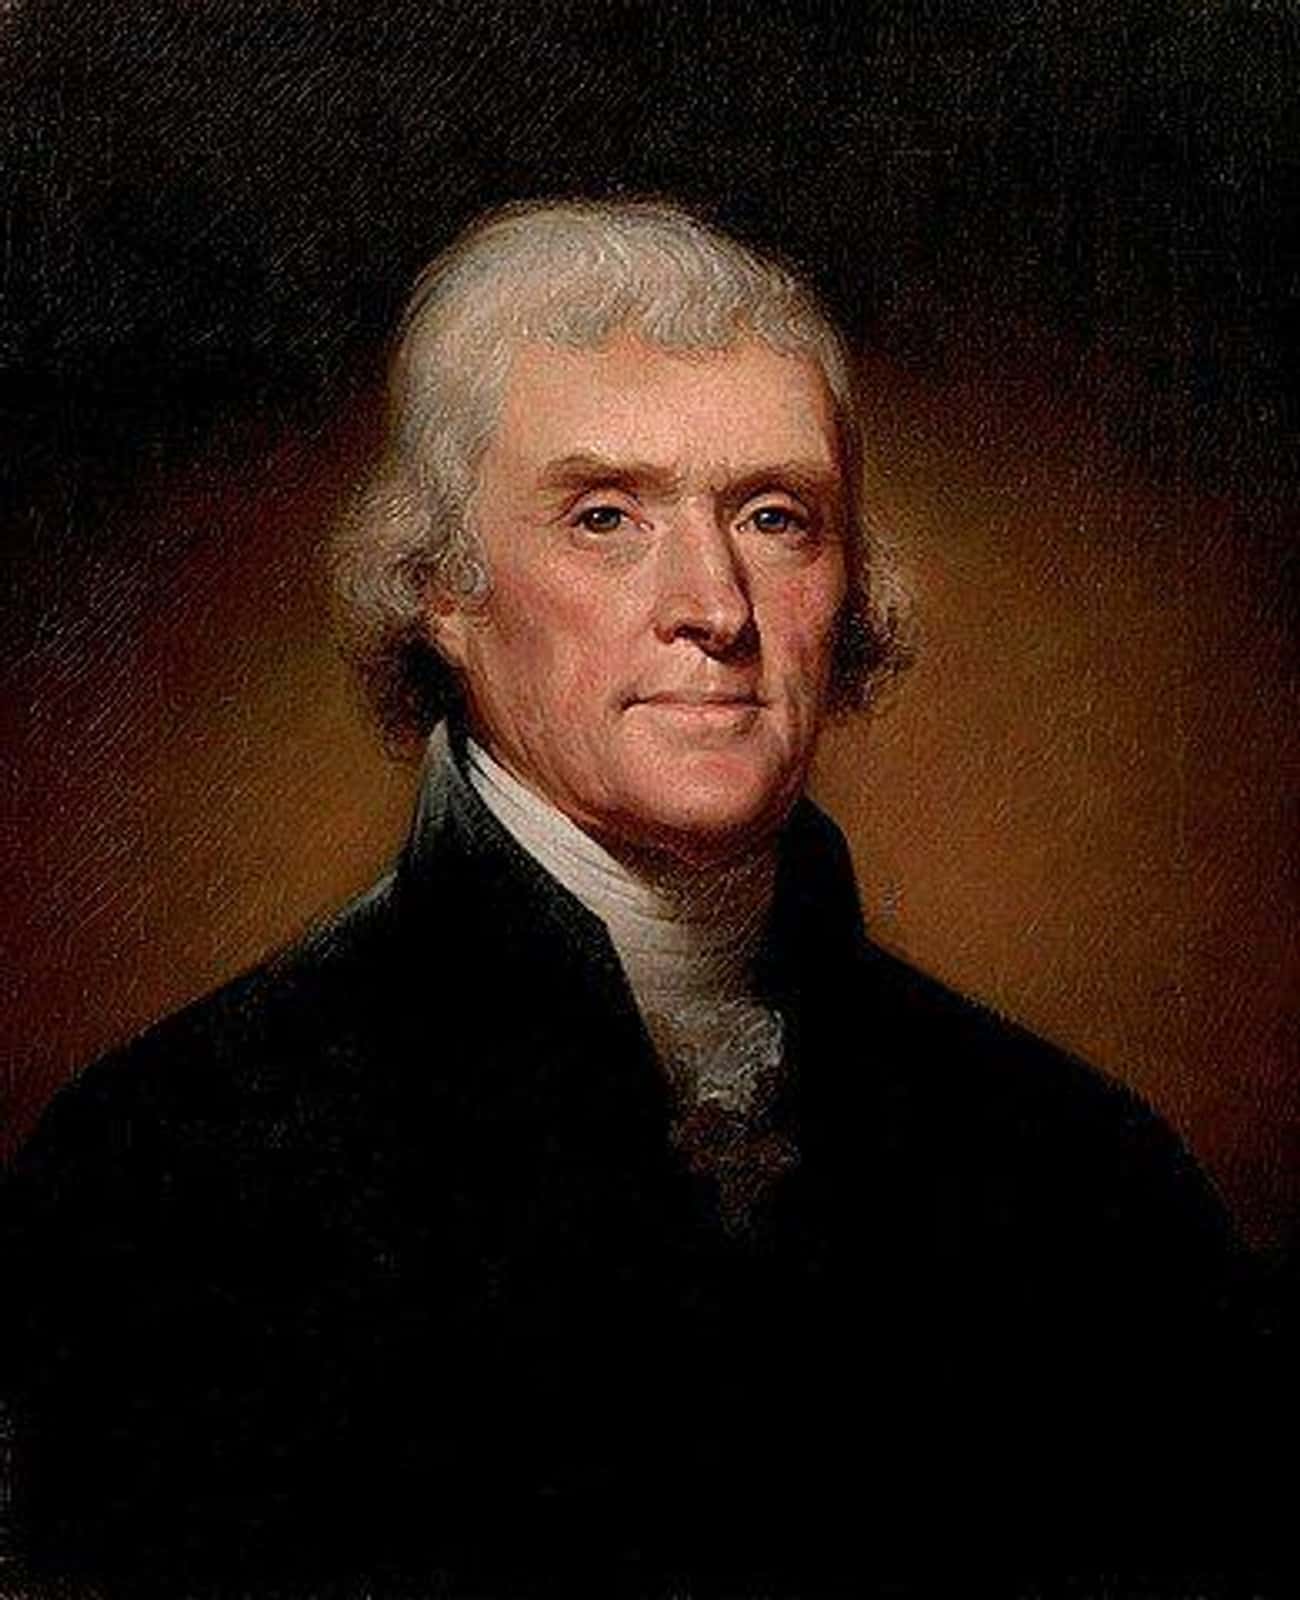 Jefferson Fathered At Least One Child With A Woman He Enslaved, Sally Hemings, And Likely More